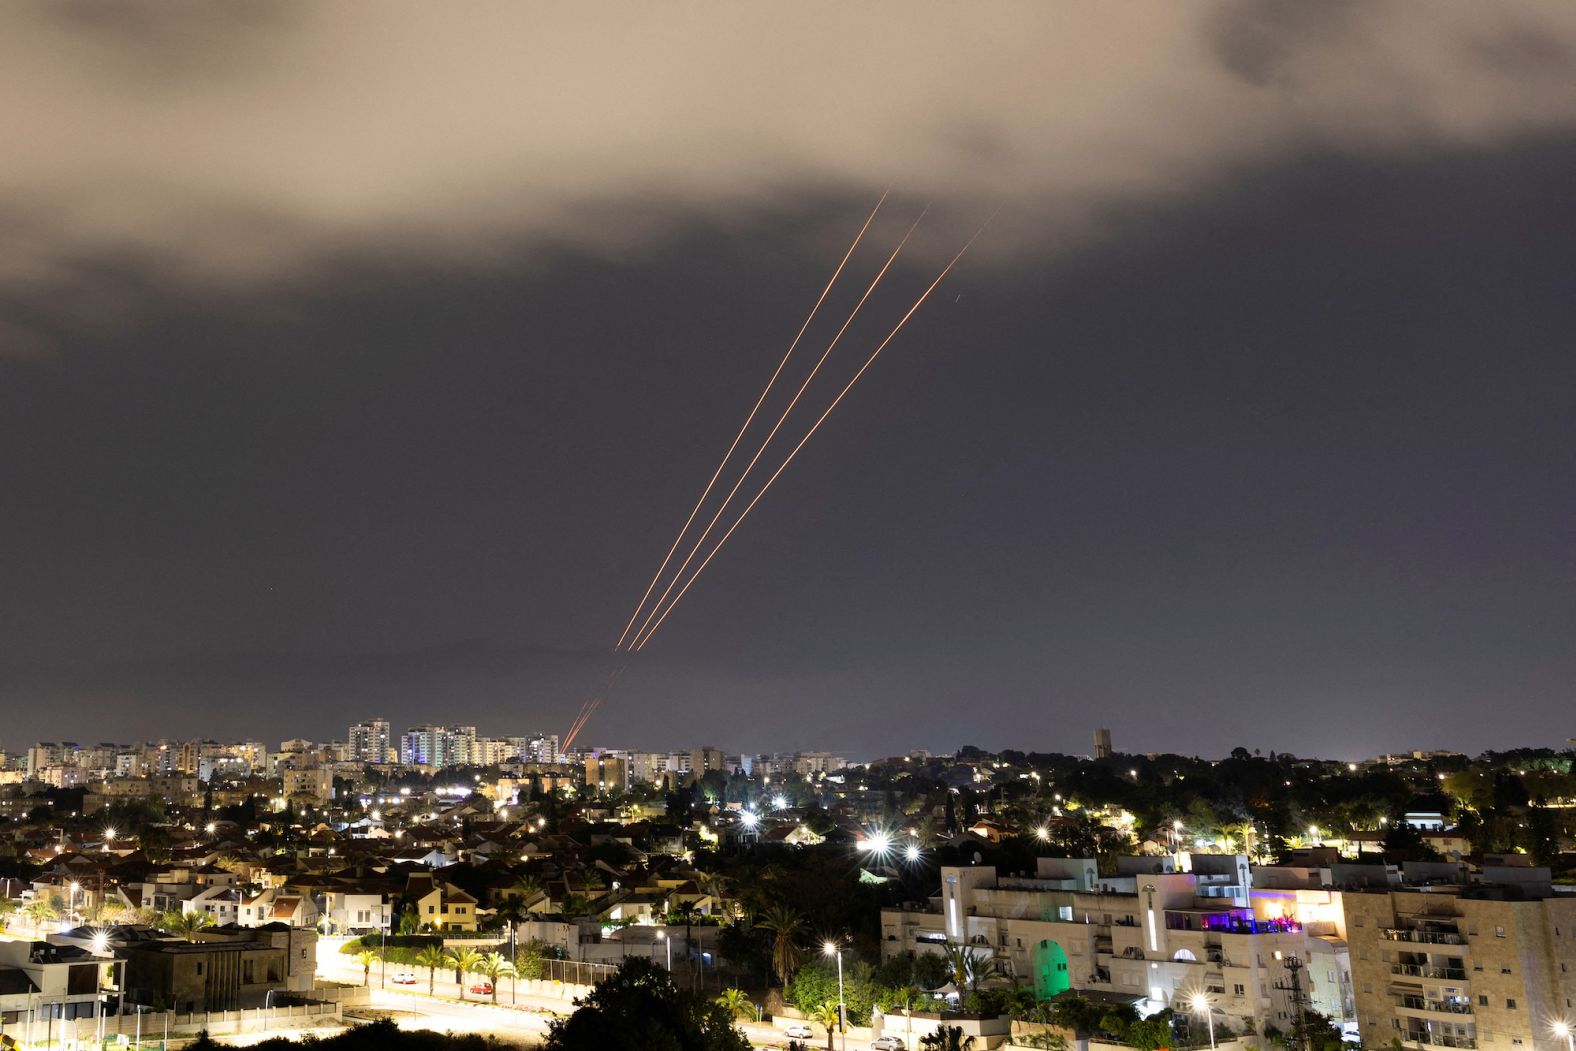 An anti-missile system, as seen from Ashkelon, Israel, operates early Sunday, April 14, after Iran launched an unprecedented <a href="index.php?page=&url=https%3A%2F%2Fwww.cnn.com%2F2024%2F04%2F13%2Fmiddleeast%2Firan-drones-attack-israel-intl-latam%2Findex.html" target="_blank">large-scale drone and missile attack</a> at Israel. Iran attacked late Saturday <a href="index.php?page=&url=https%3A%2F%2Fwww.cnn.com%2F2024%2F04%2F14%2Fmiddleeast%2Fwhy-iran-attack-israel-intl%2Findex.html" target="_blank">in retaliation for a suspected Israeli strike</a> on an Iranian diplomatic complex in Syria earlier this month. More than 300 projectiles were fired toward Israel, but "99%" of them were intercepted by Israel's aerial defense systems and its "partners," according to the Israeli military.